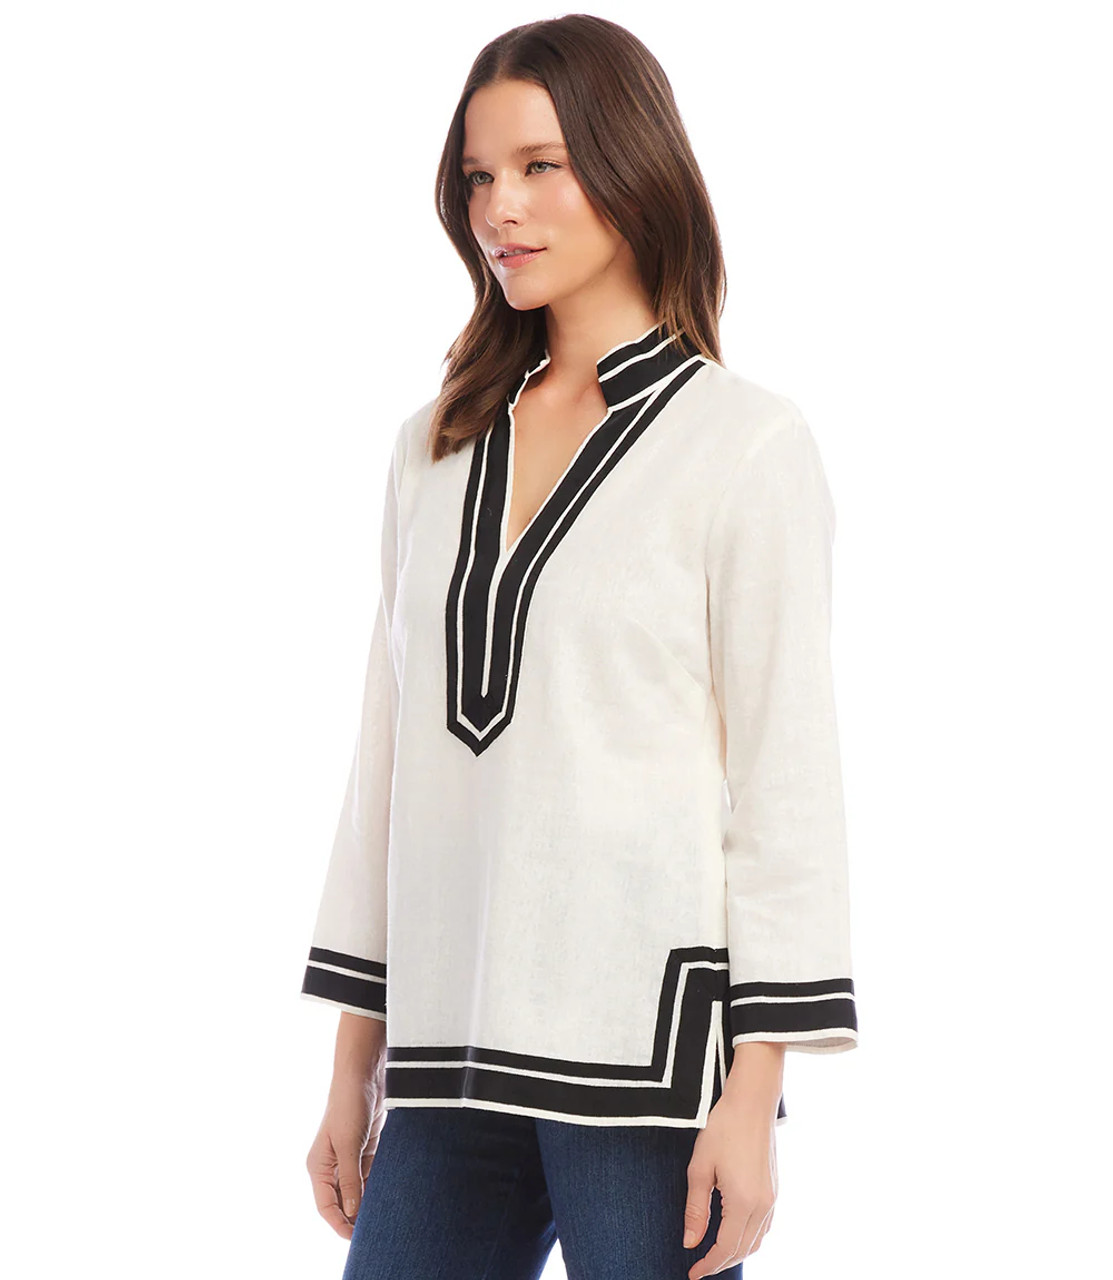 St. Tropez Tunic - Monkee's of Fort Worth